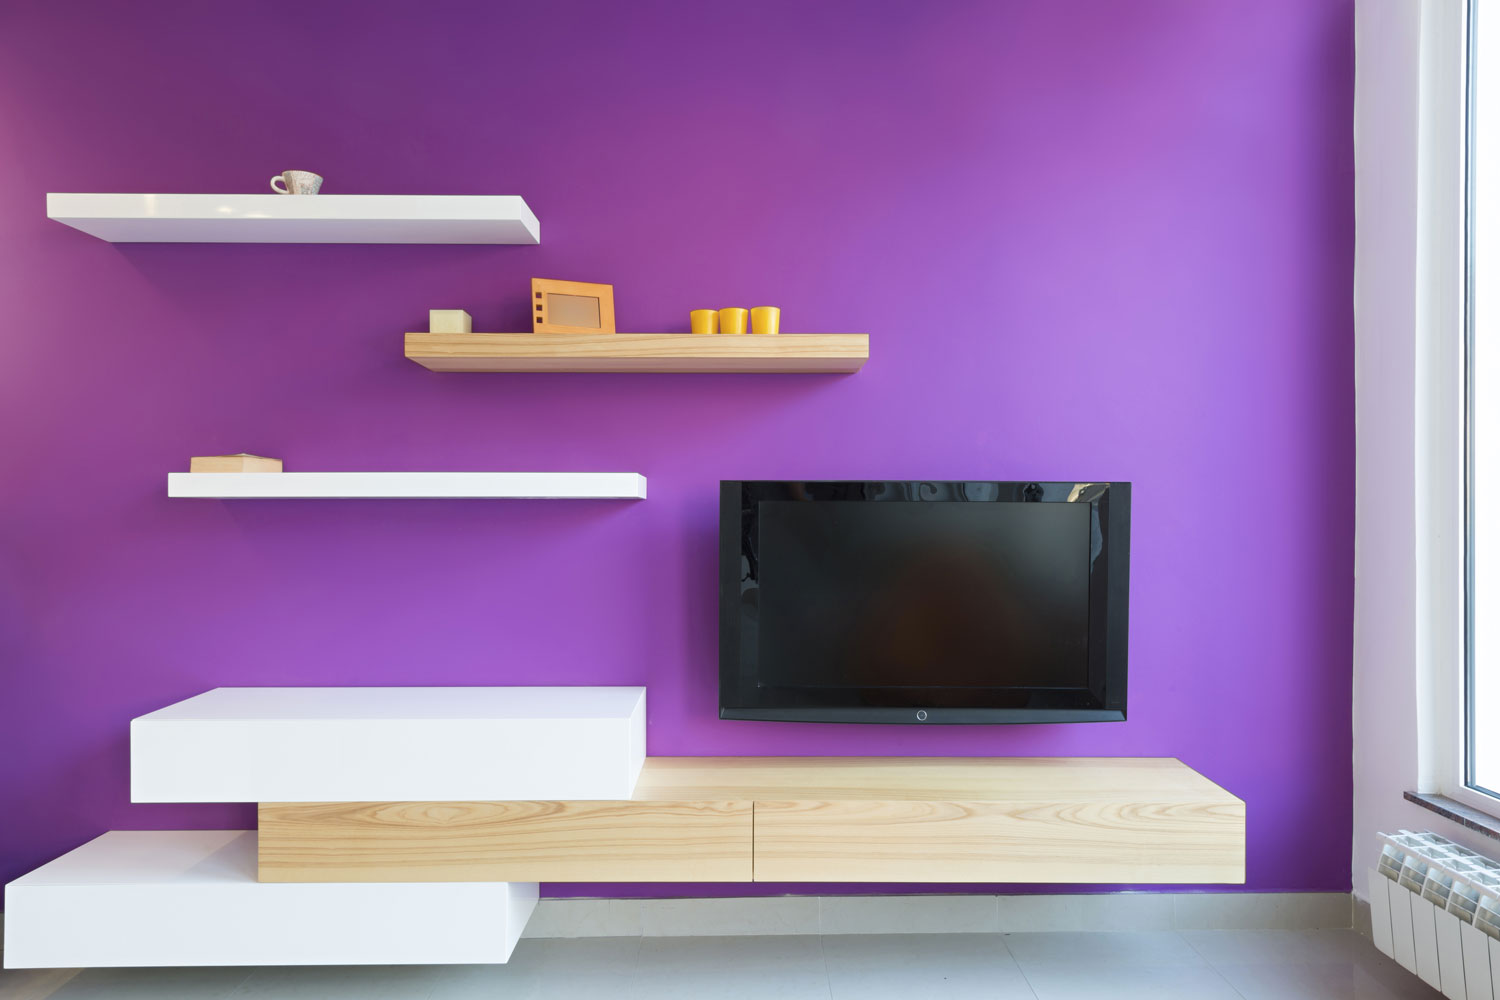 A purple colored accent wall with floating dividers and a small night stand